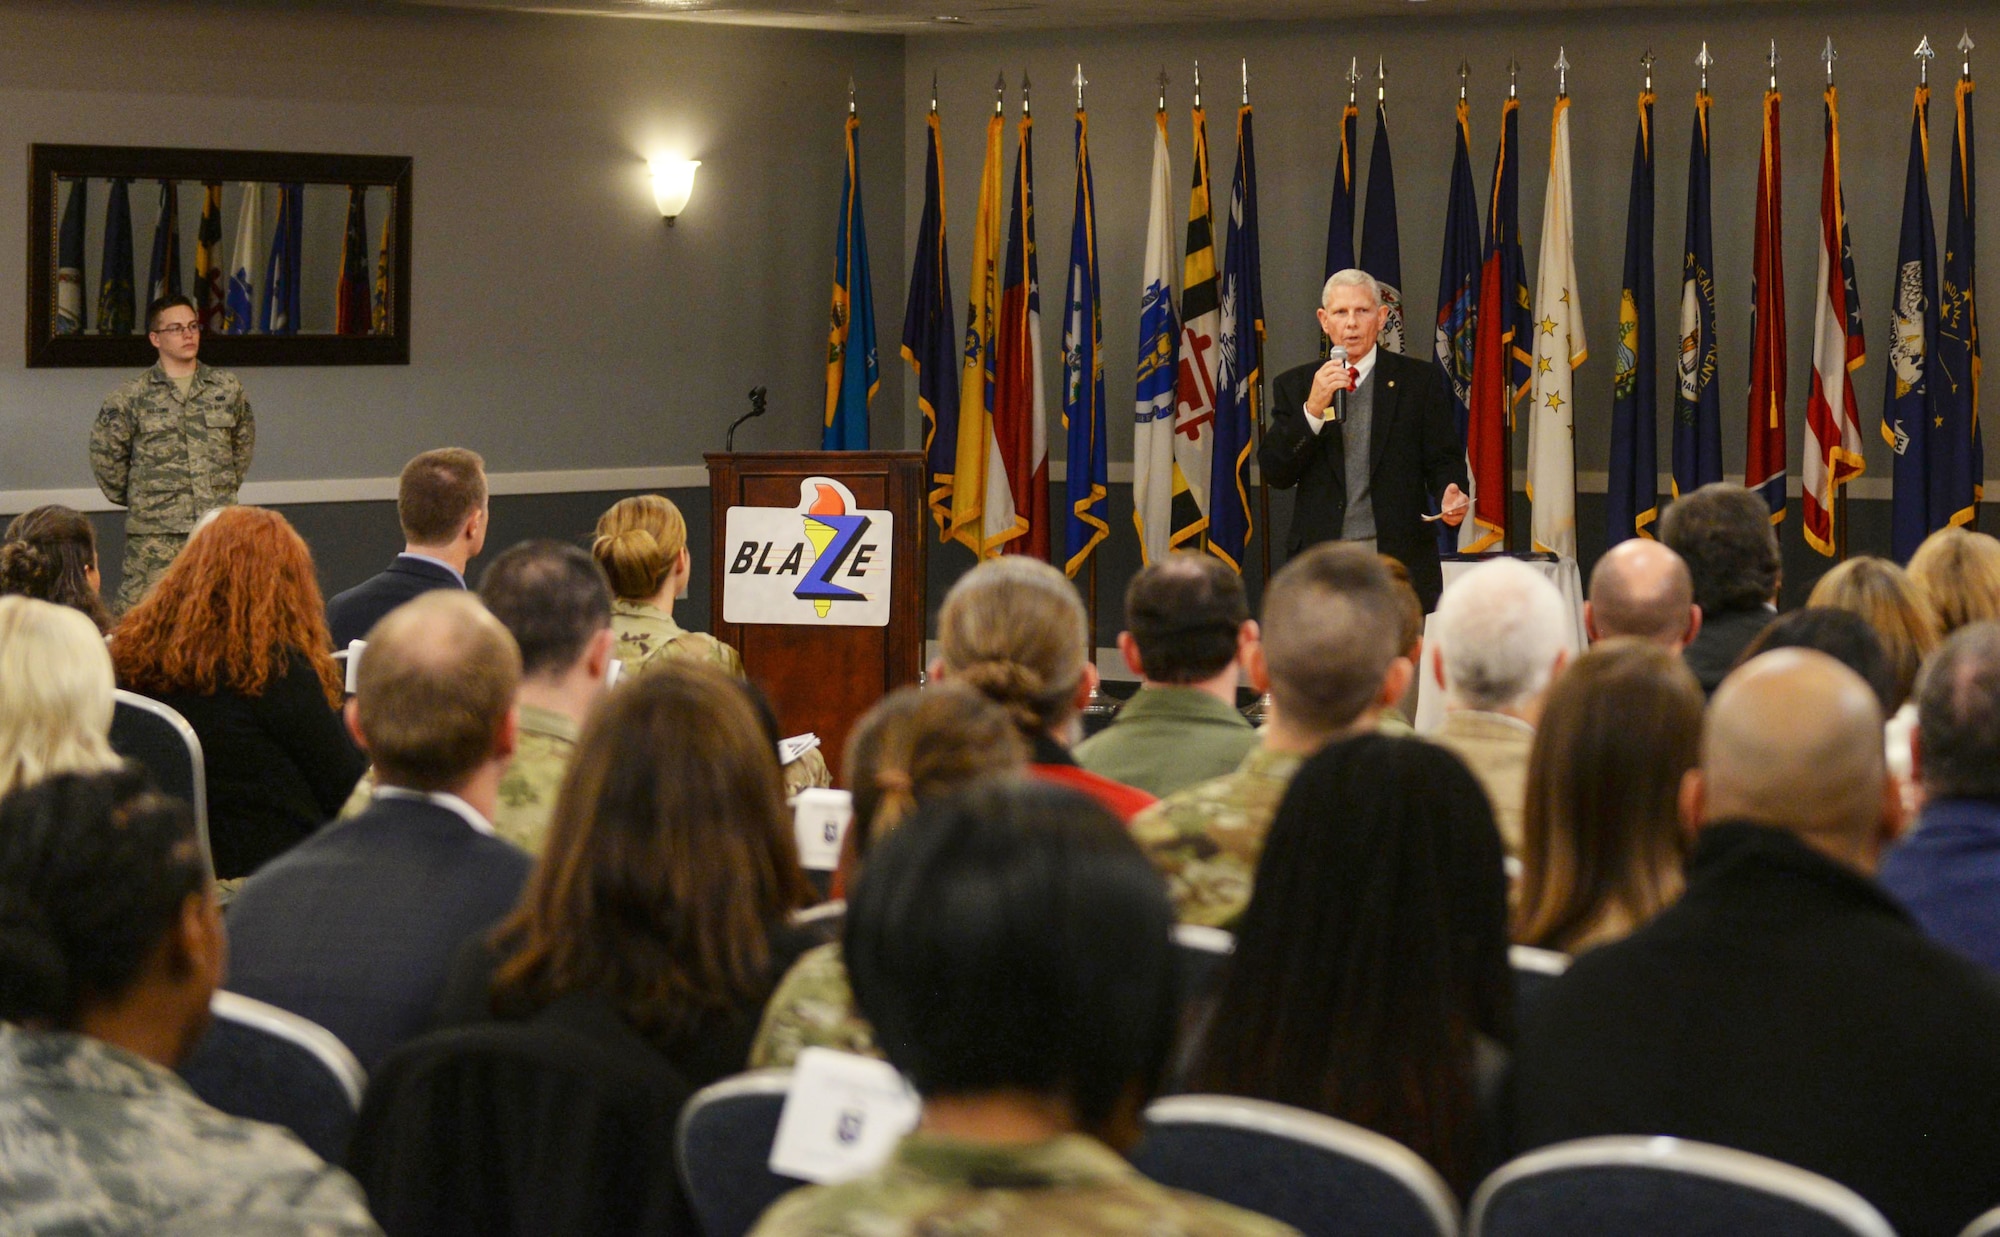 Retired Marine Corps Maj. Gen. Thomas Moore  speaks to those in attendance at the Honorary Commander Induction Ceremony Jan. 21, 2020, at Columbus Air Force Base, Miss. Moore was commissioned as a second lieutenant in the Marine Corps in 1973 through Officer Candidate School in Quantico, Va., and has lived in Columbus since 2008. (U.S. Air Force photo by Airman Davis Donaldson)